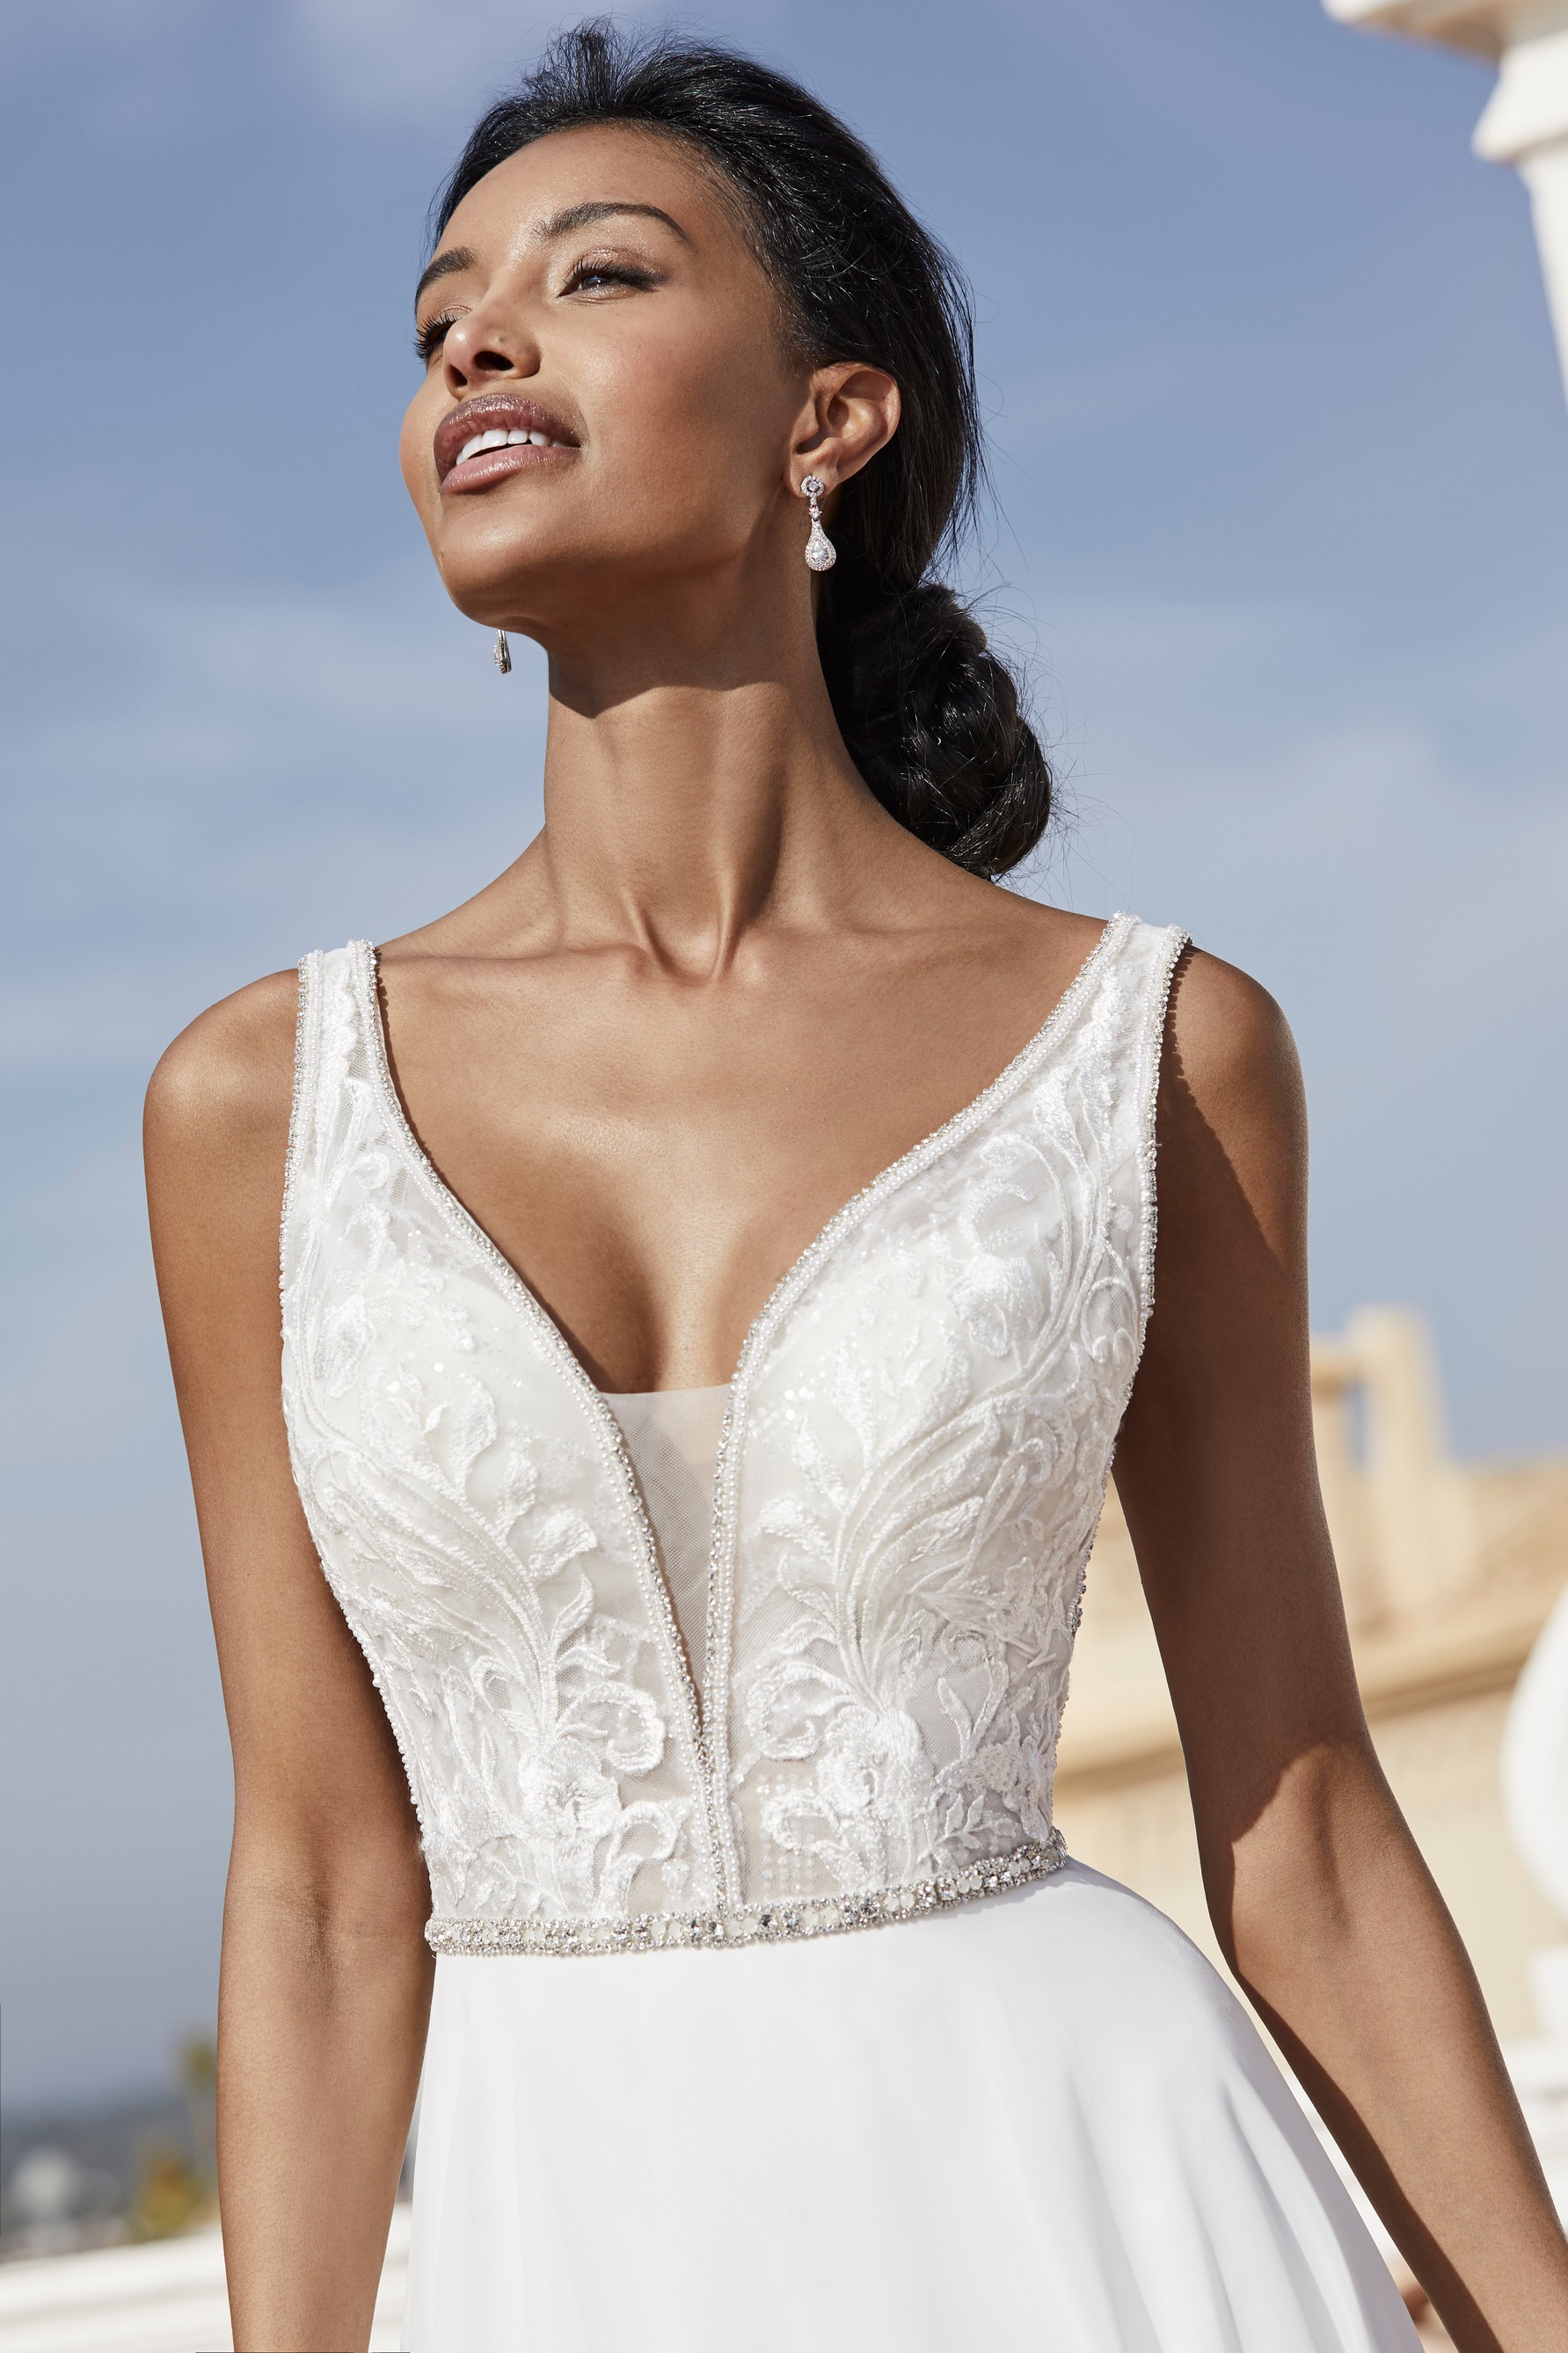 Lady standing outside on patio wearing v-neck wedding dress with illusion plunge neck and embellished belt